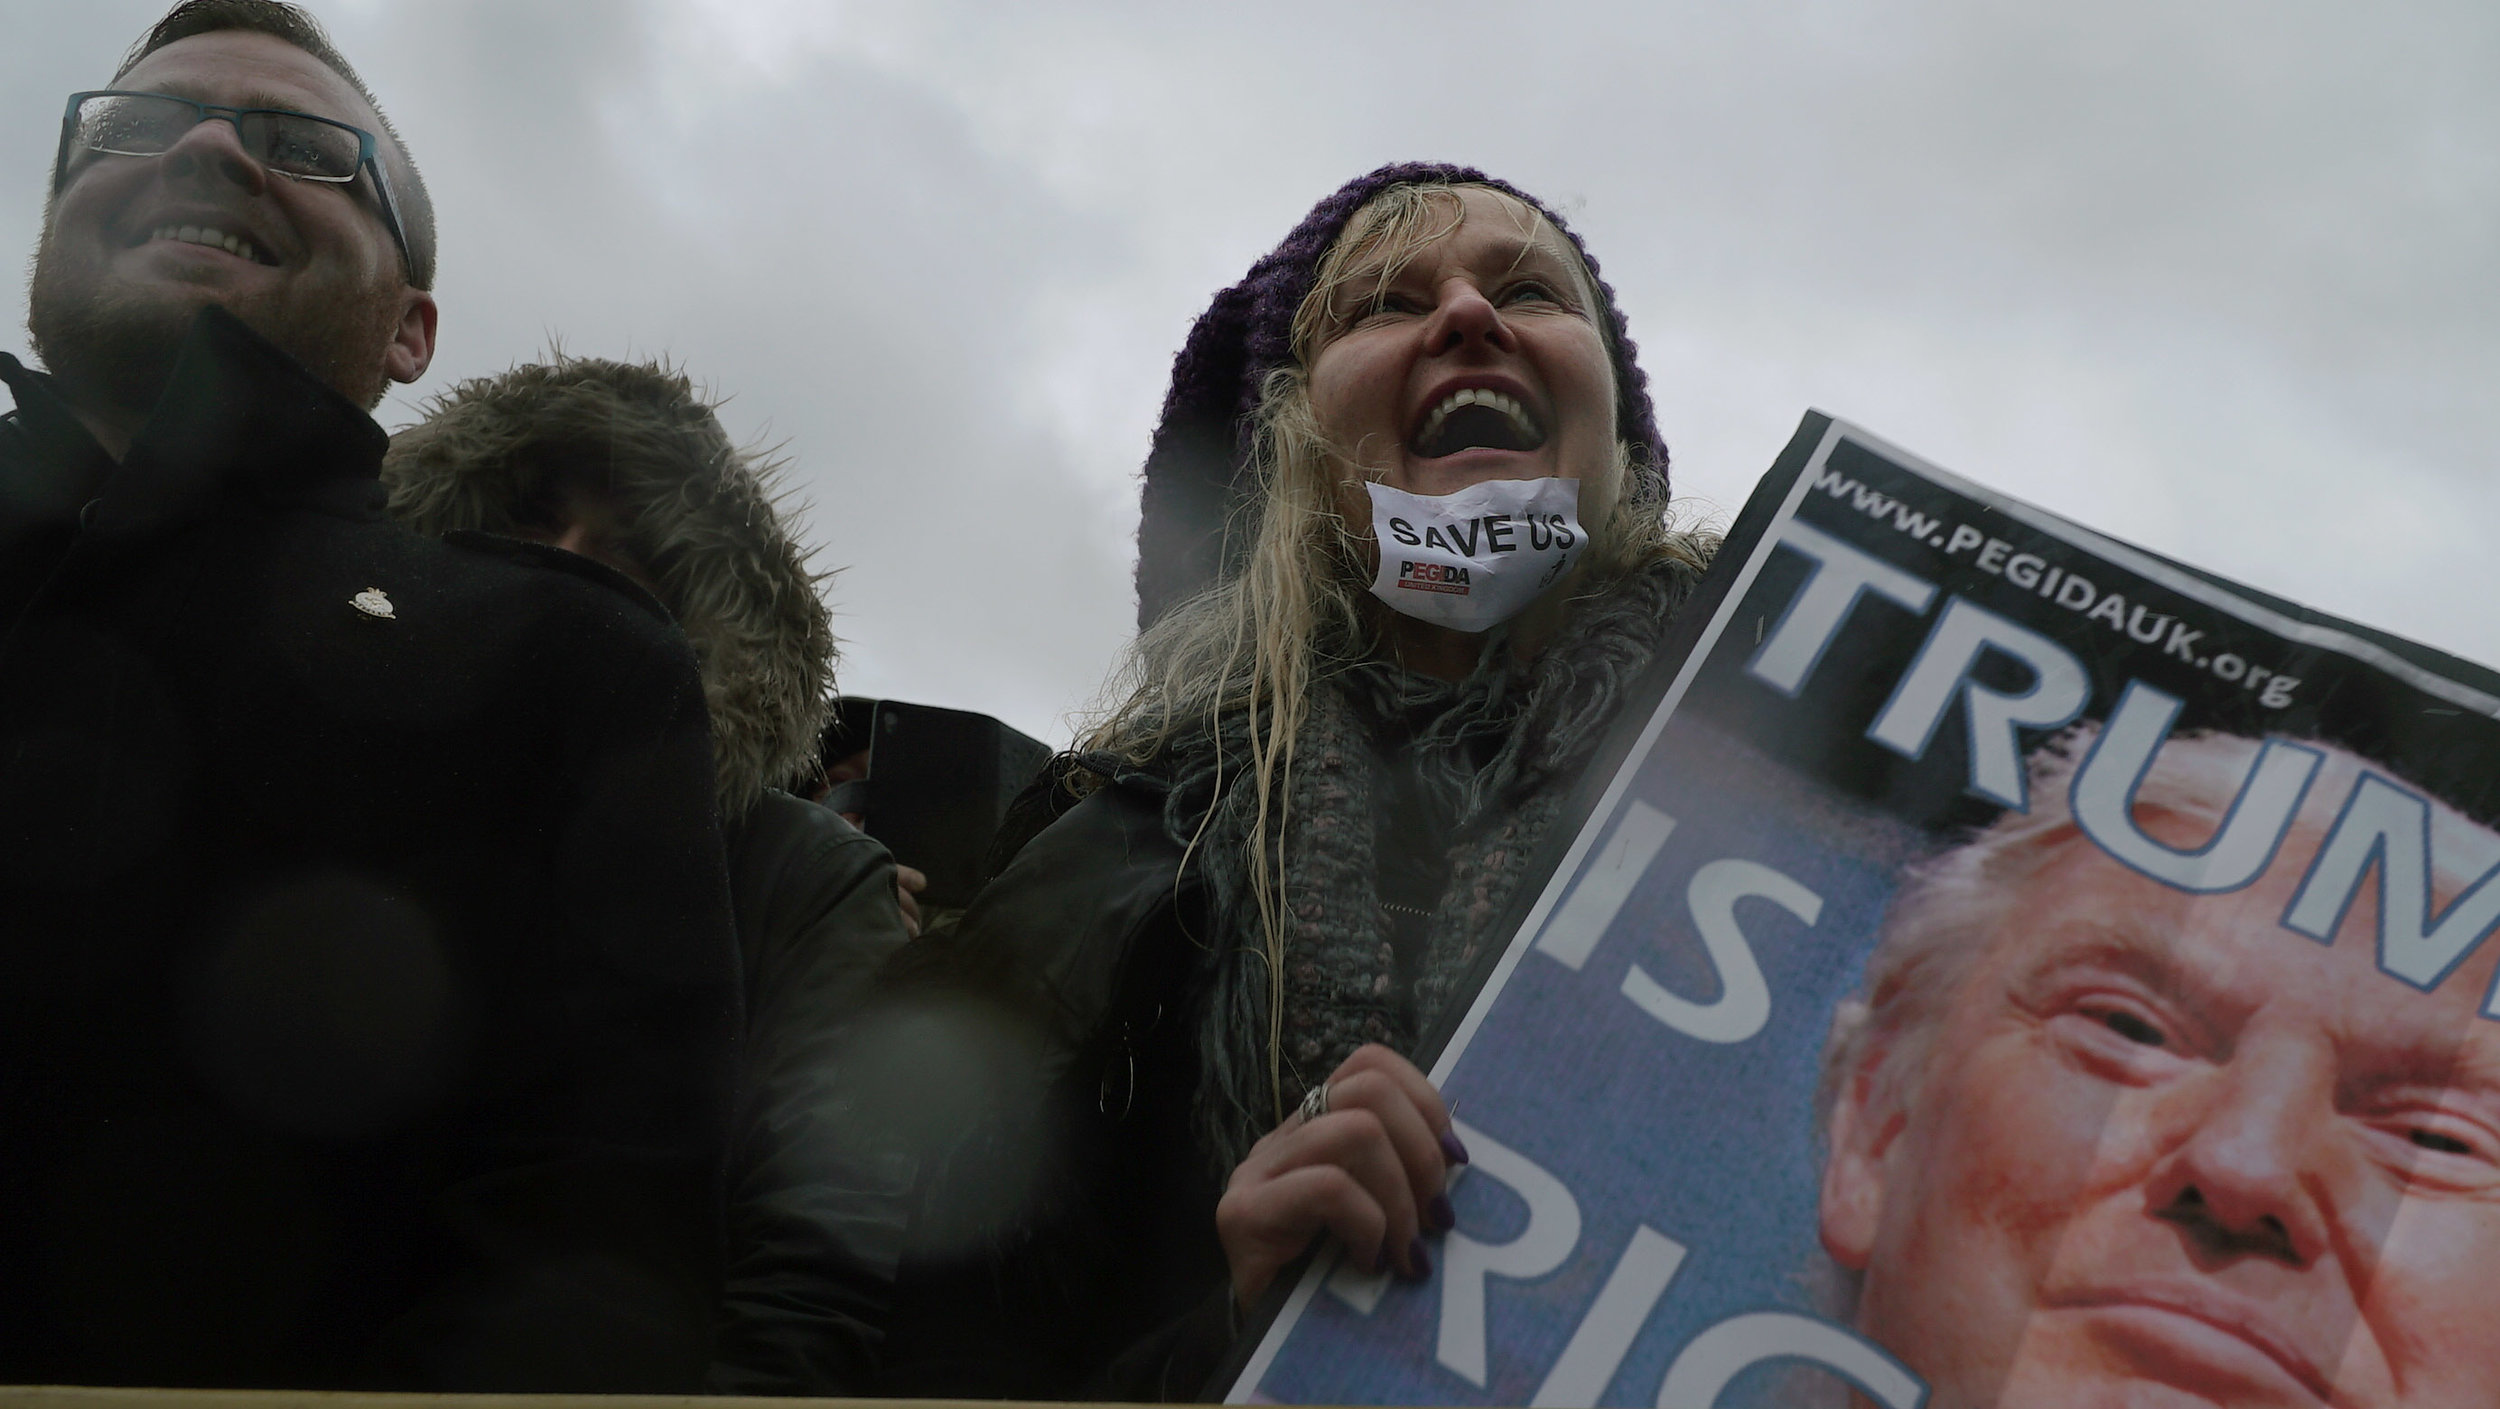  Homemade signs that read “Trump is Right” are carried for miles by PEGIDA marchers in Birmingham, UK. In February 2016, many European countries joined the first Europe-wide PEGIDA protest.  Photo by Sarah McClure  